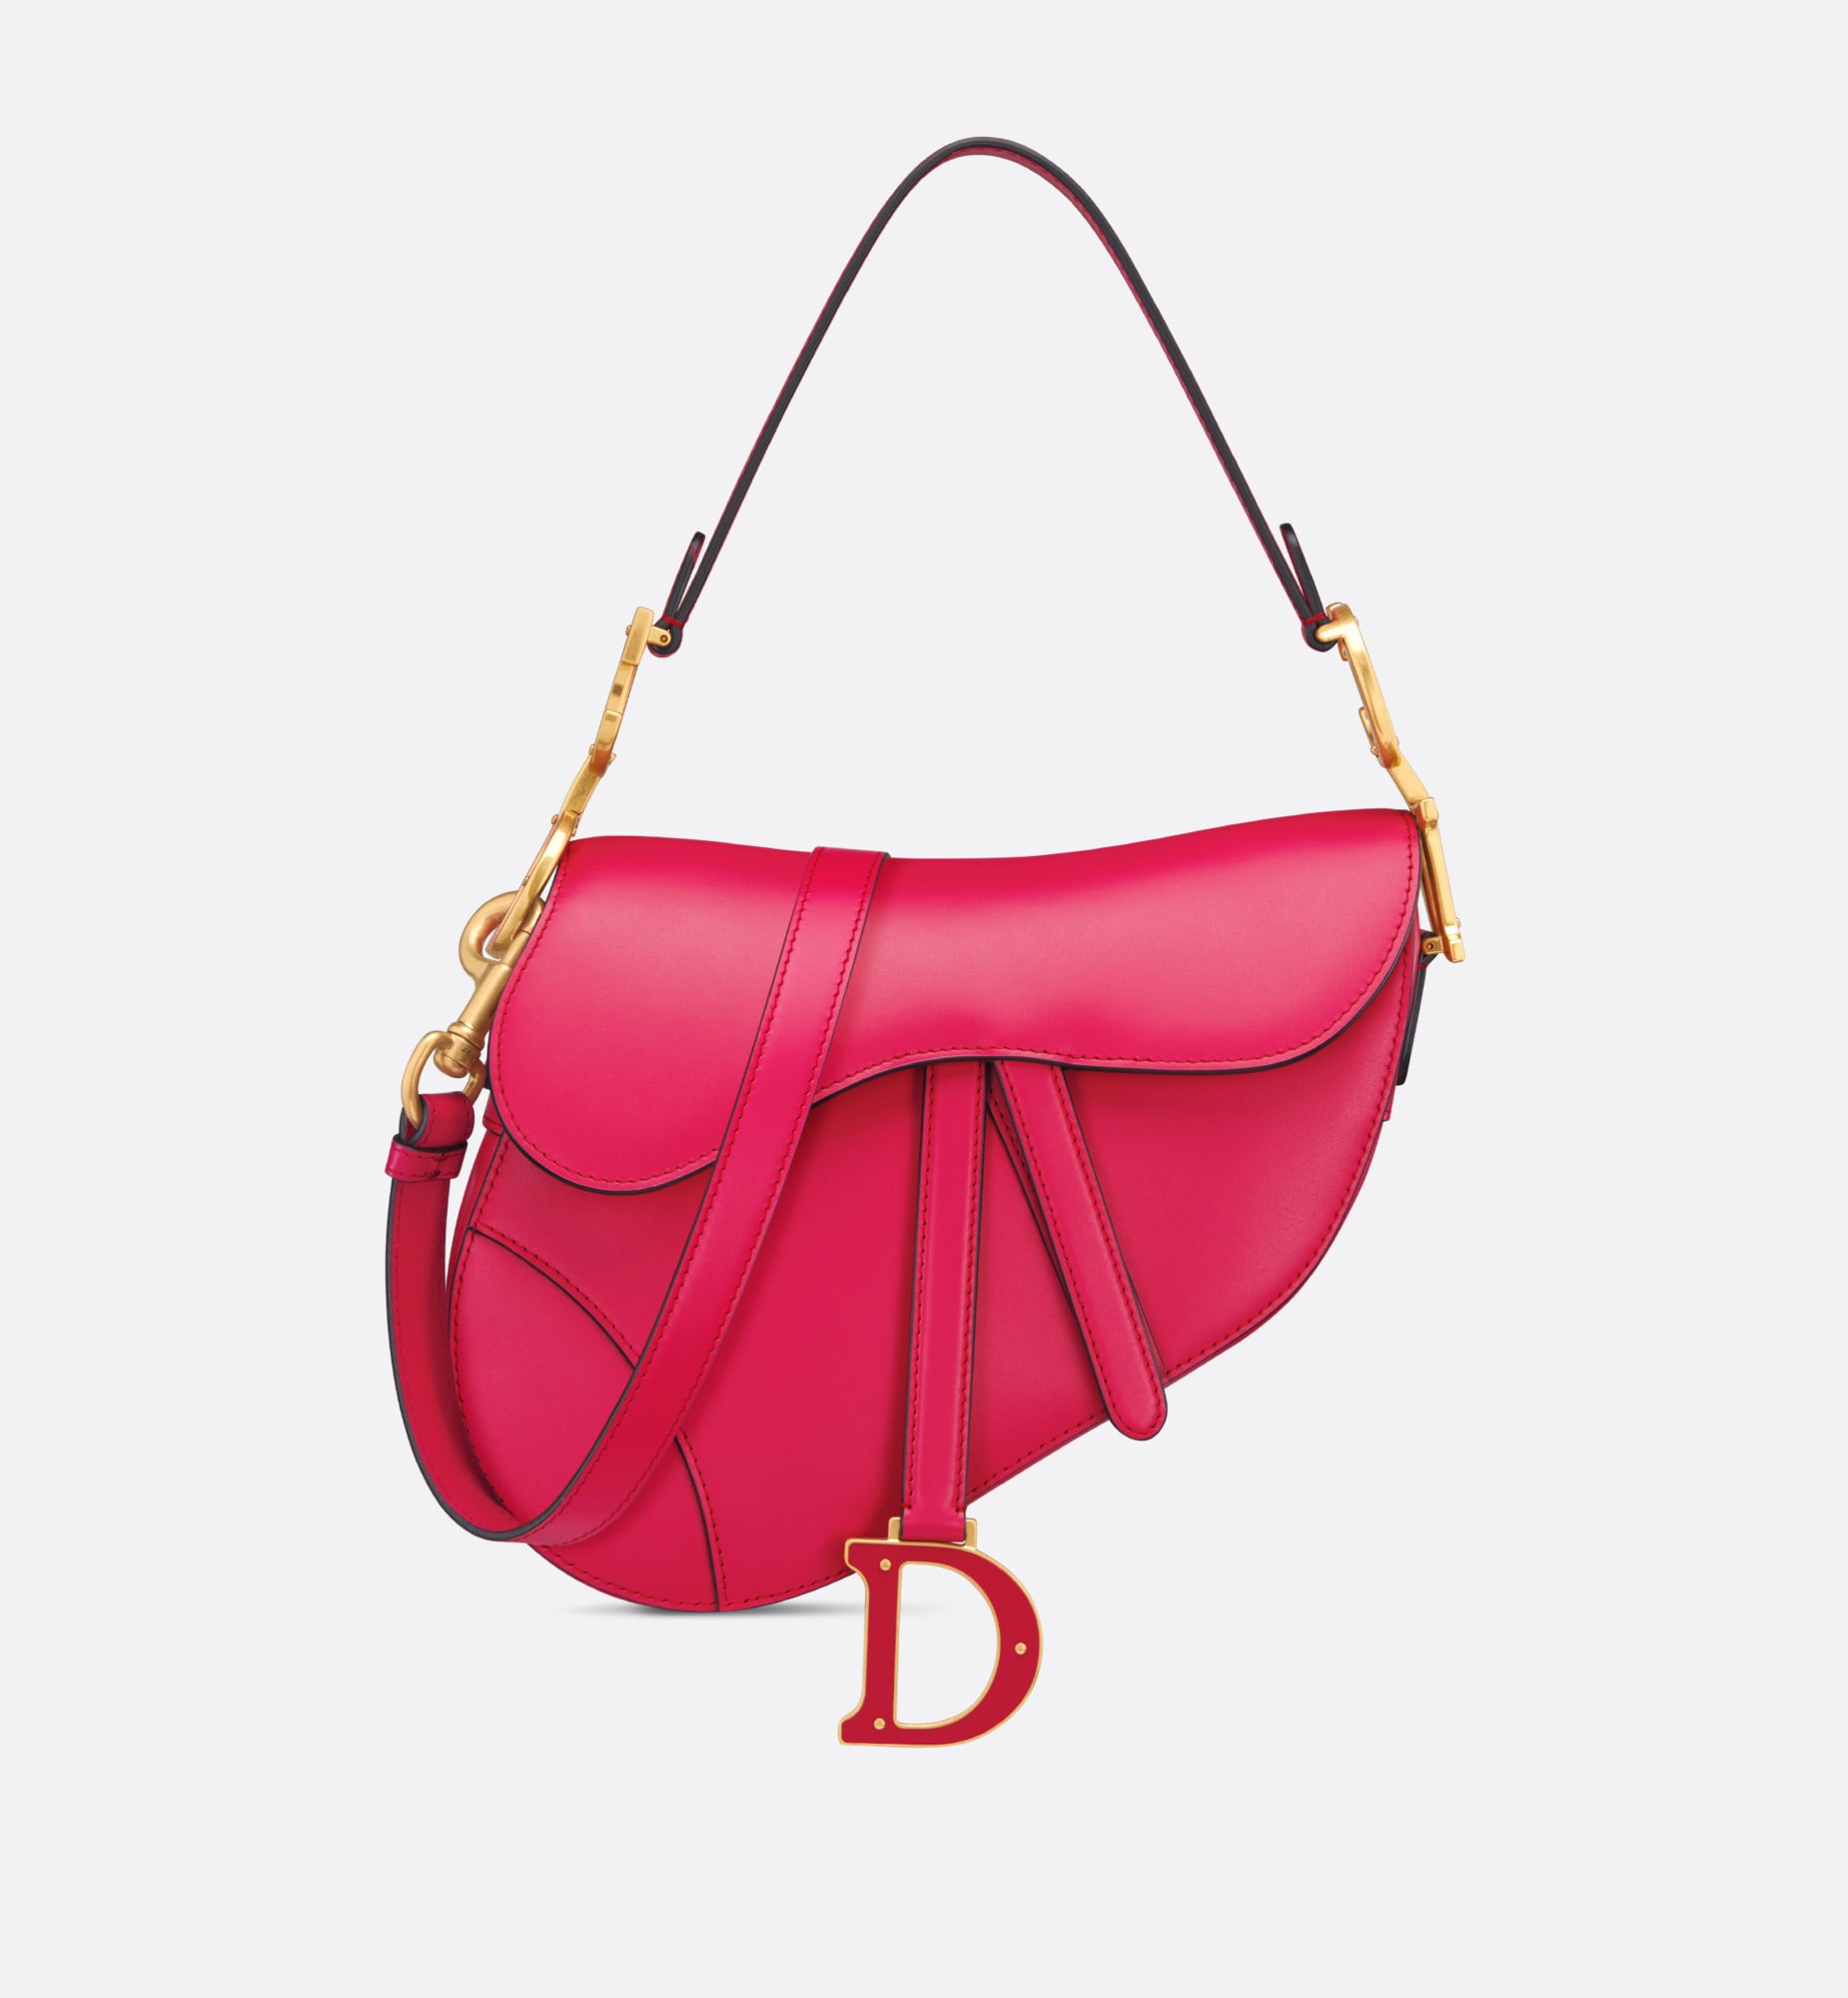 Saddle Bag with Strap Passion Pink Smooth Calfskin christian dior saddle bag with strap